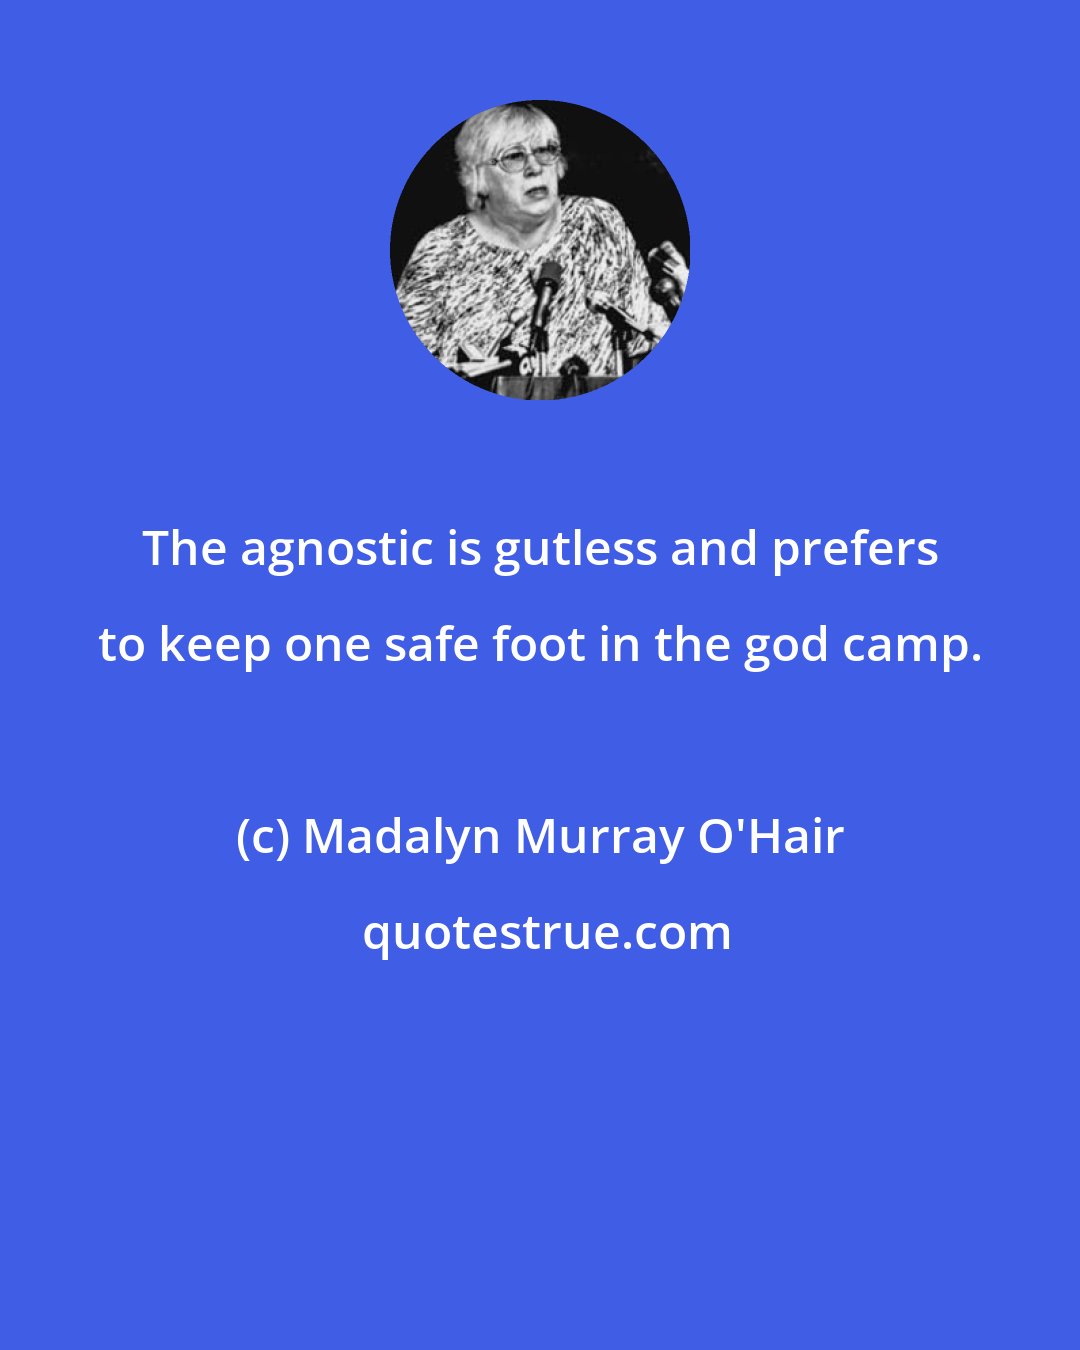 Madalyn Murray O'Hair: The agnostic is gutless and prefers to keep one safe foot in the god camp.